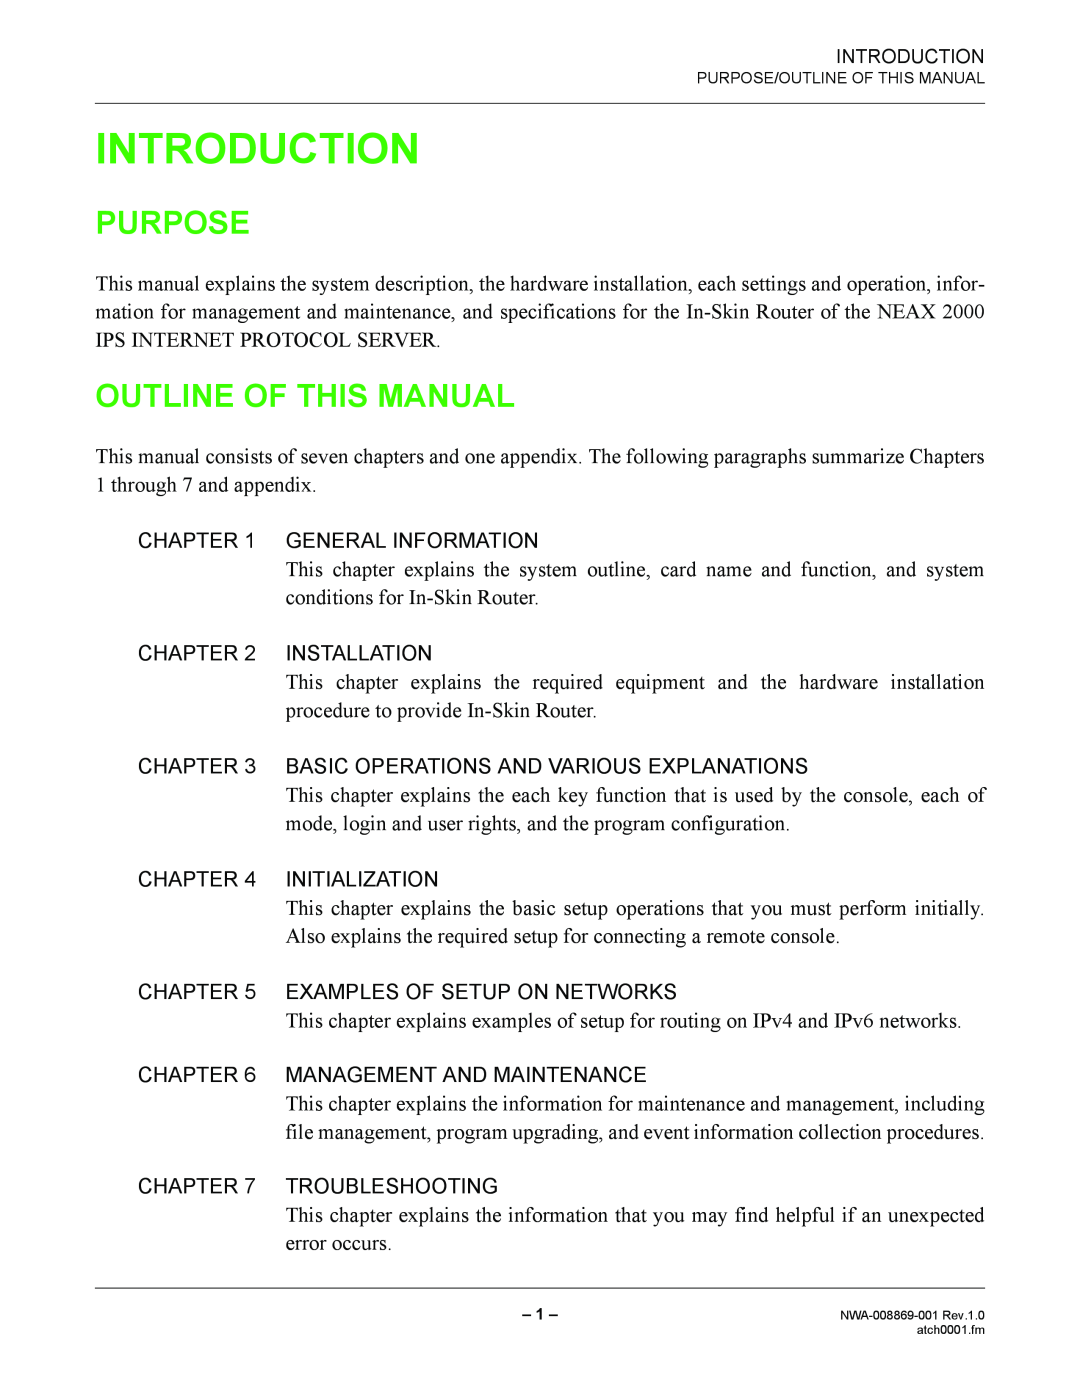 NEC NWA-008869-001 manual Purpose, Outline Of This Manual, Introduction 